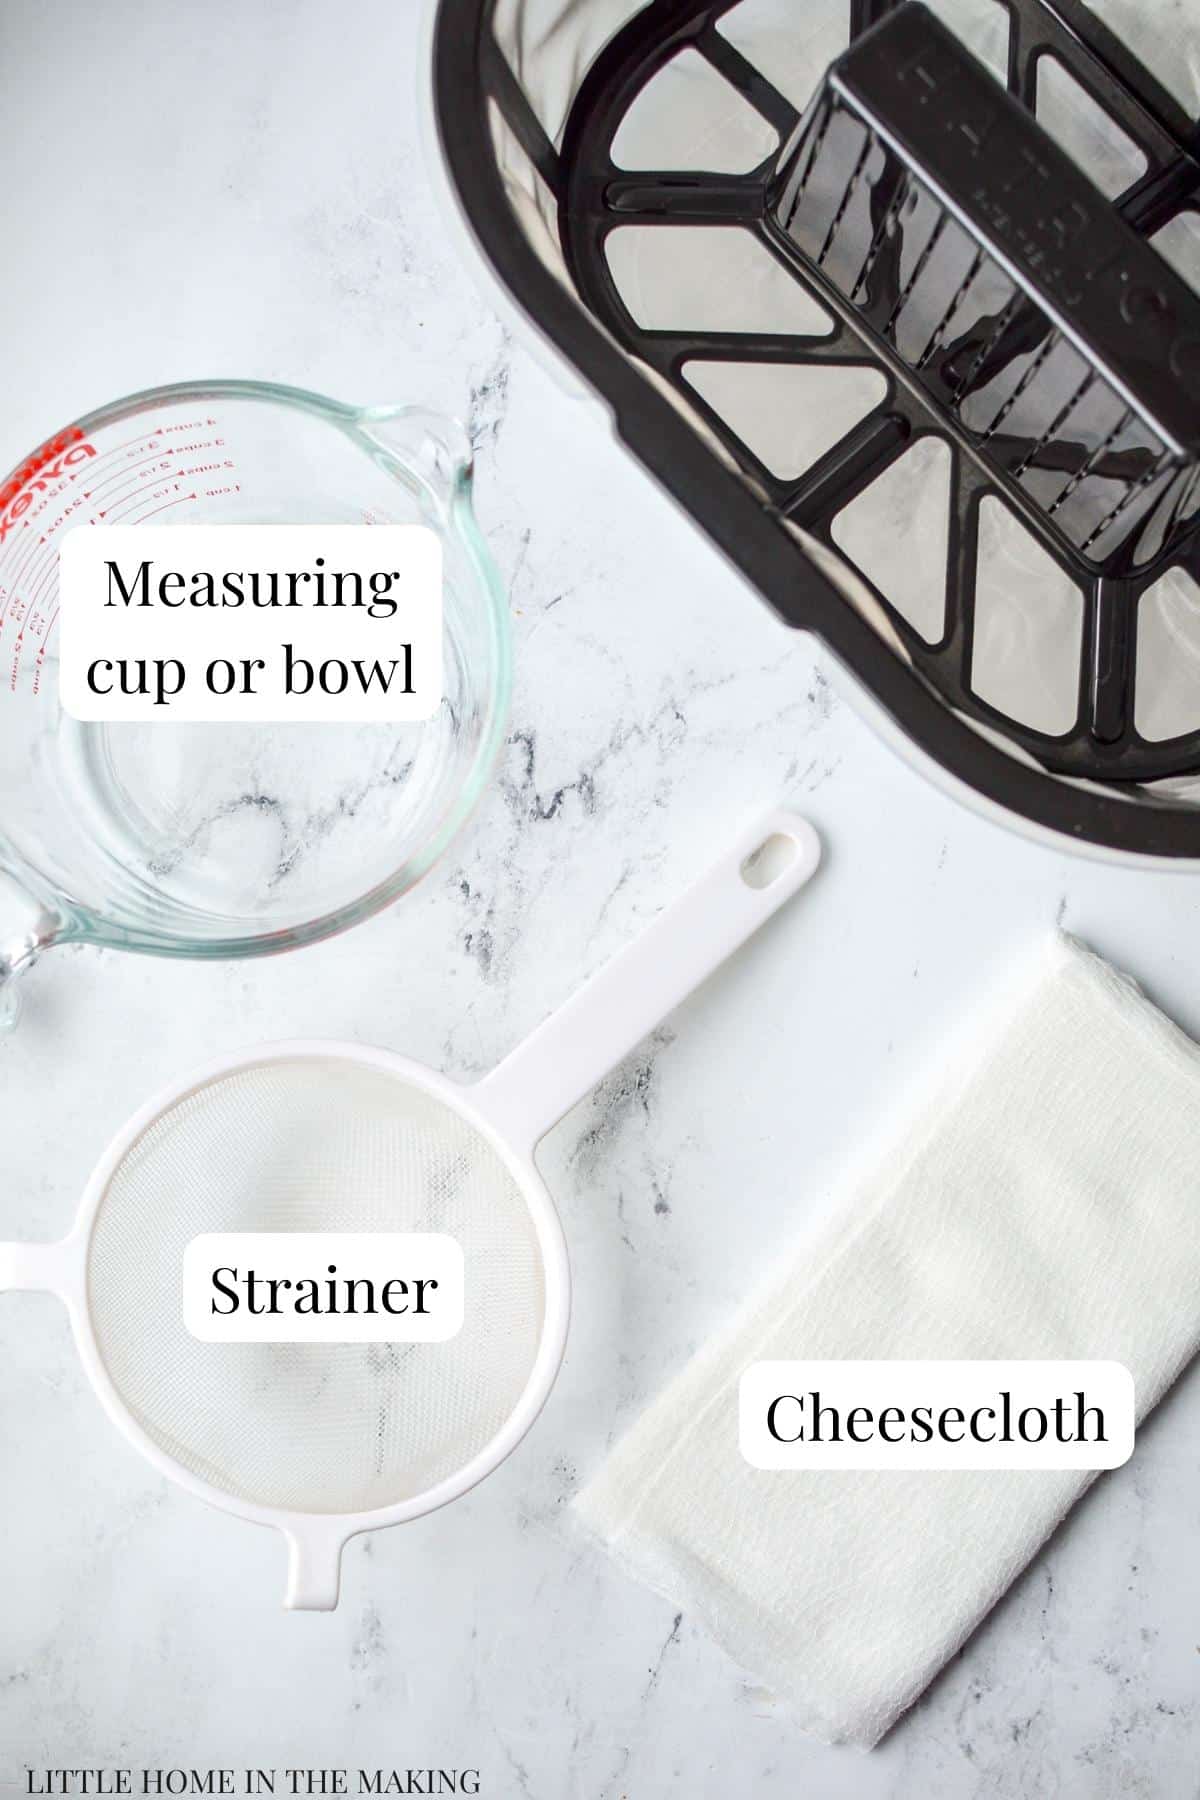 The tools needed to strain yogurt: strainer, cheesecloth, and a bowl or measuring cup.